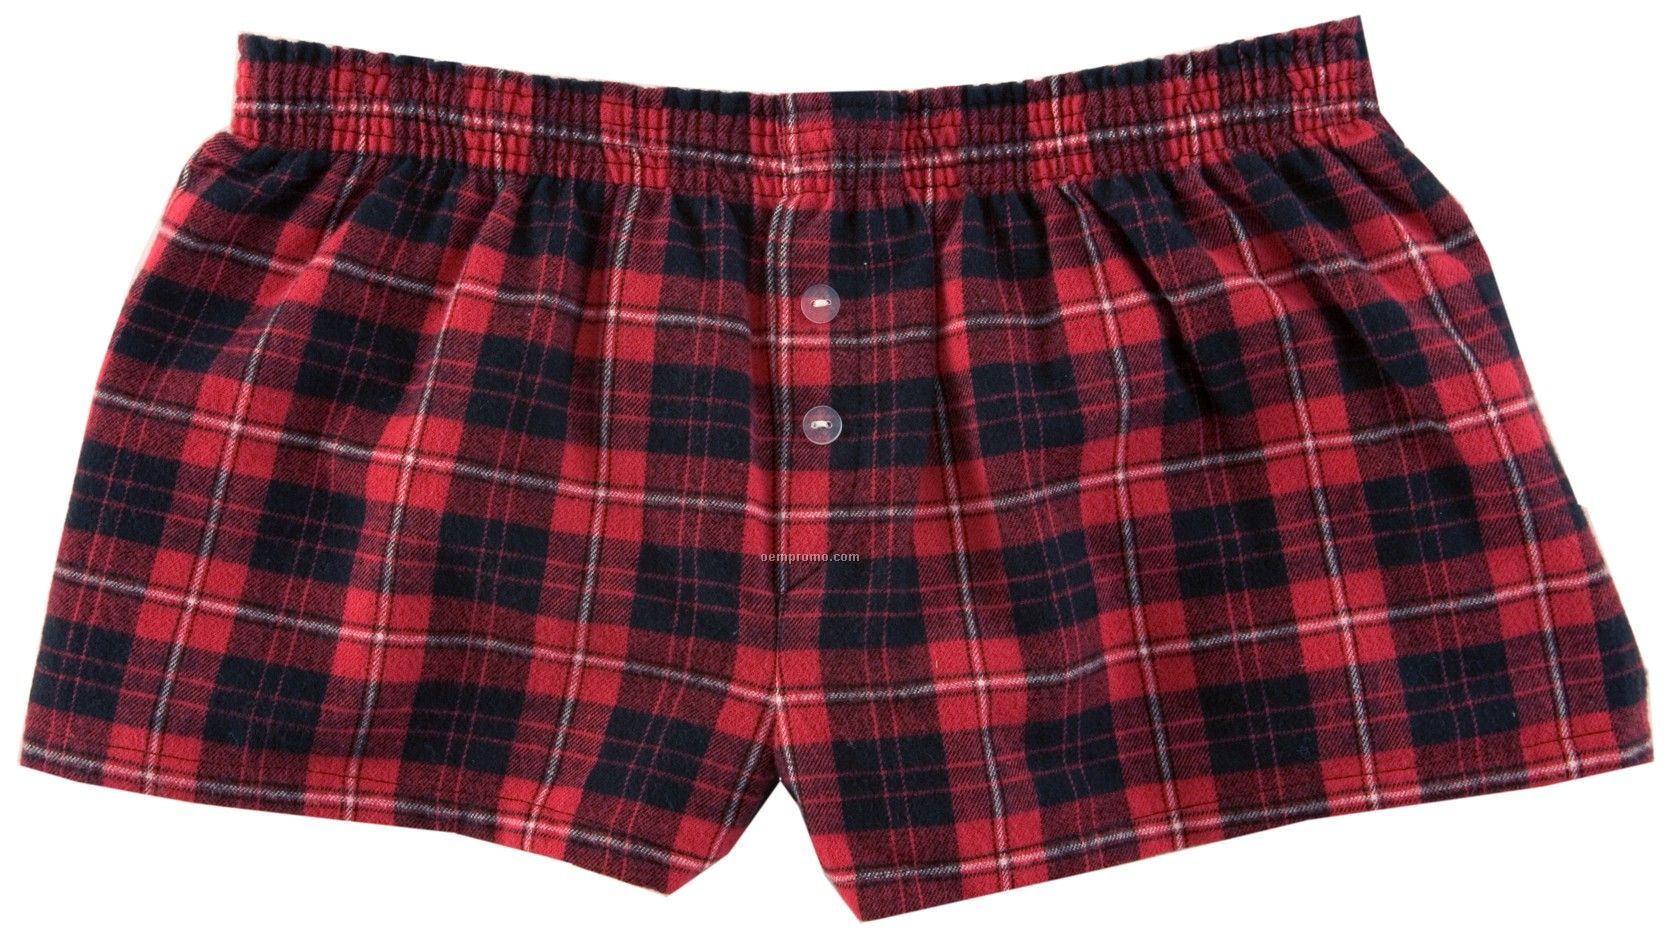 Ladies' Red/Black Flannel Bitty Boxer Short With False Fly